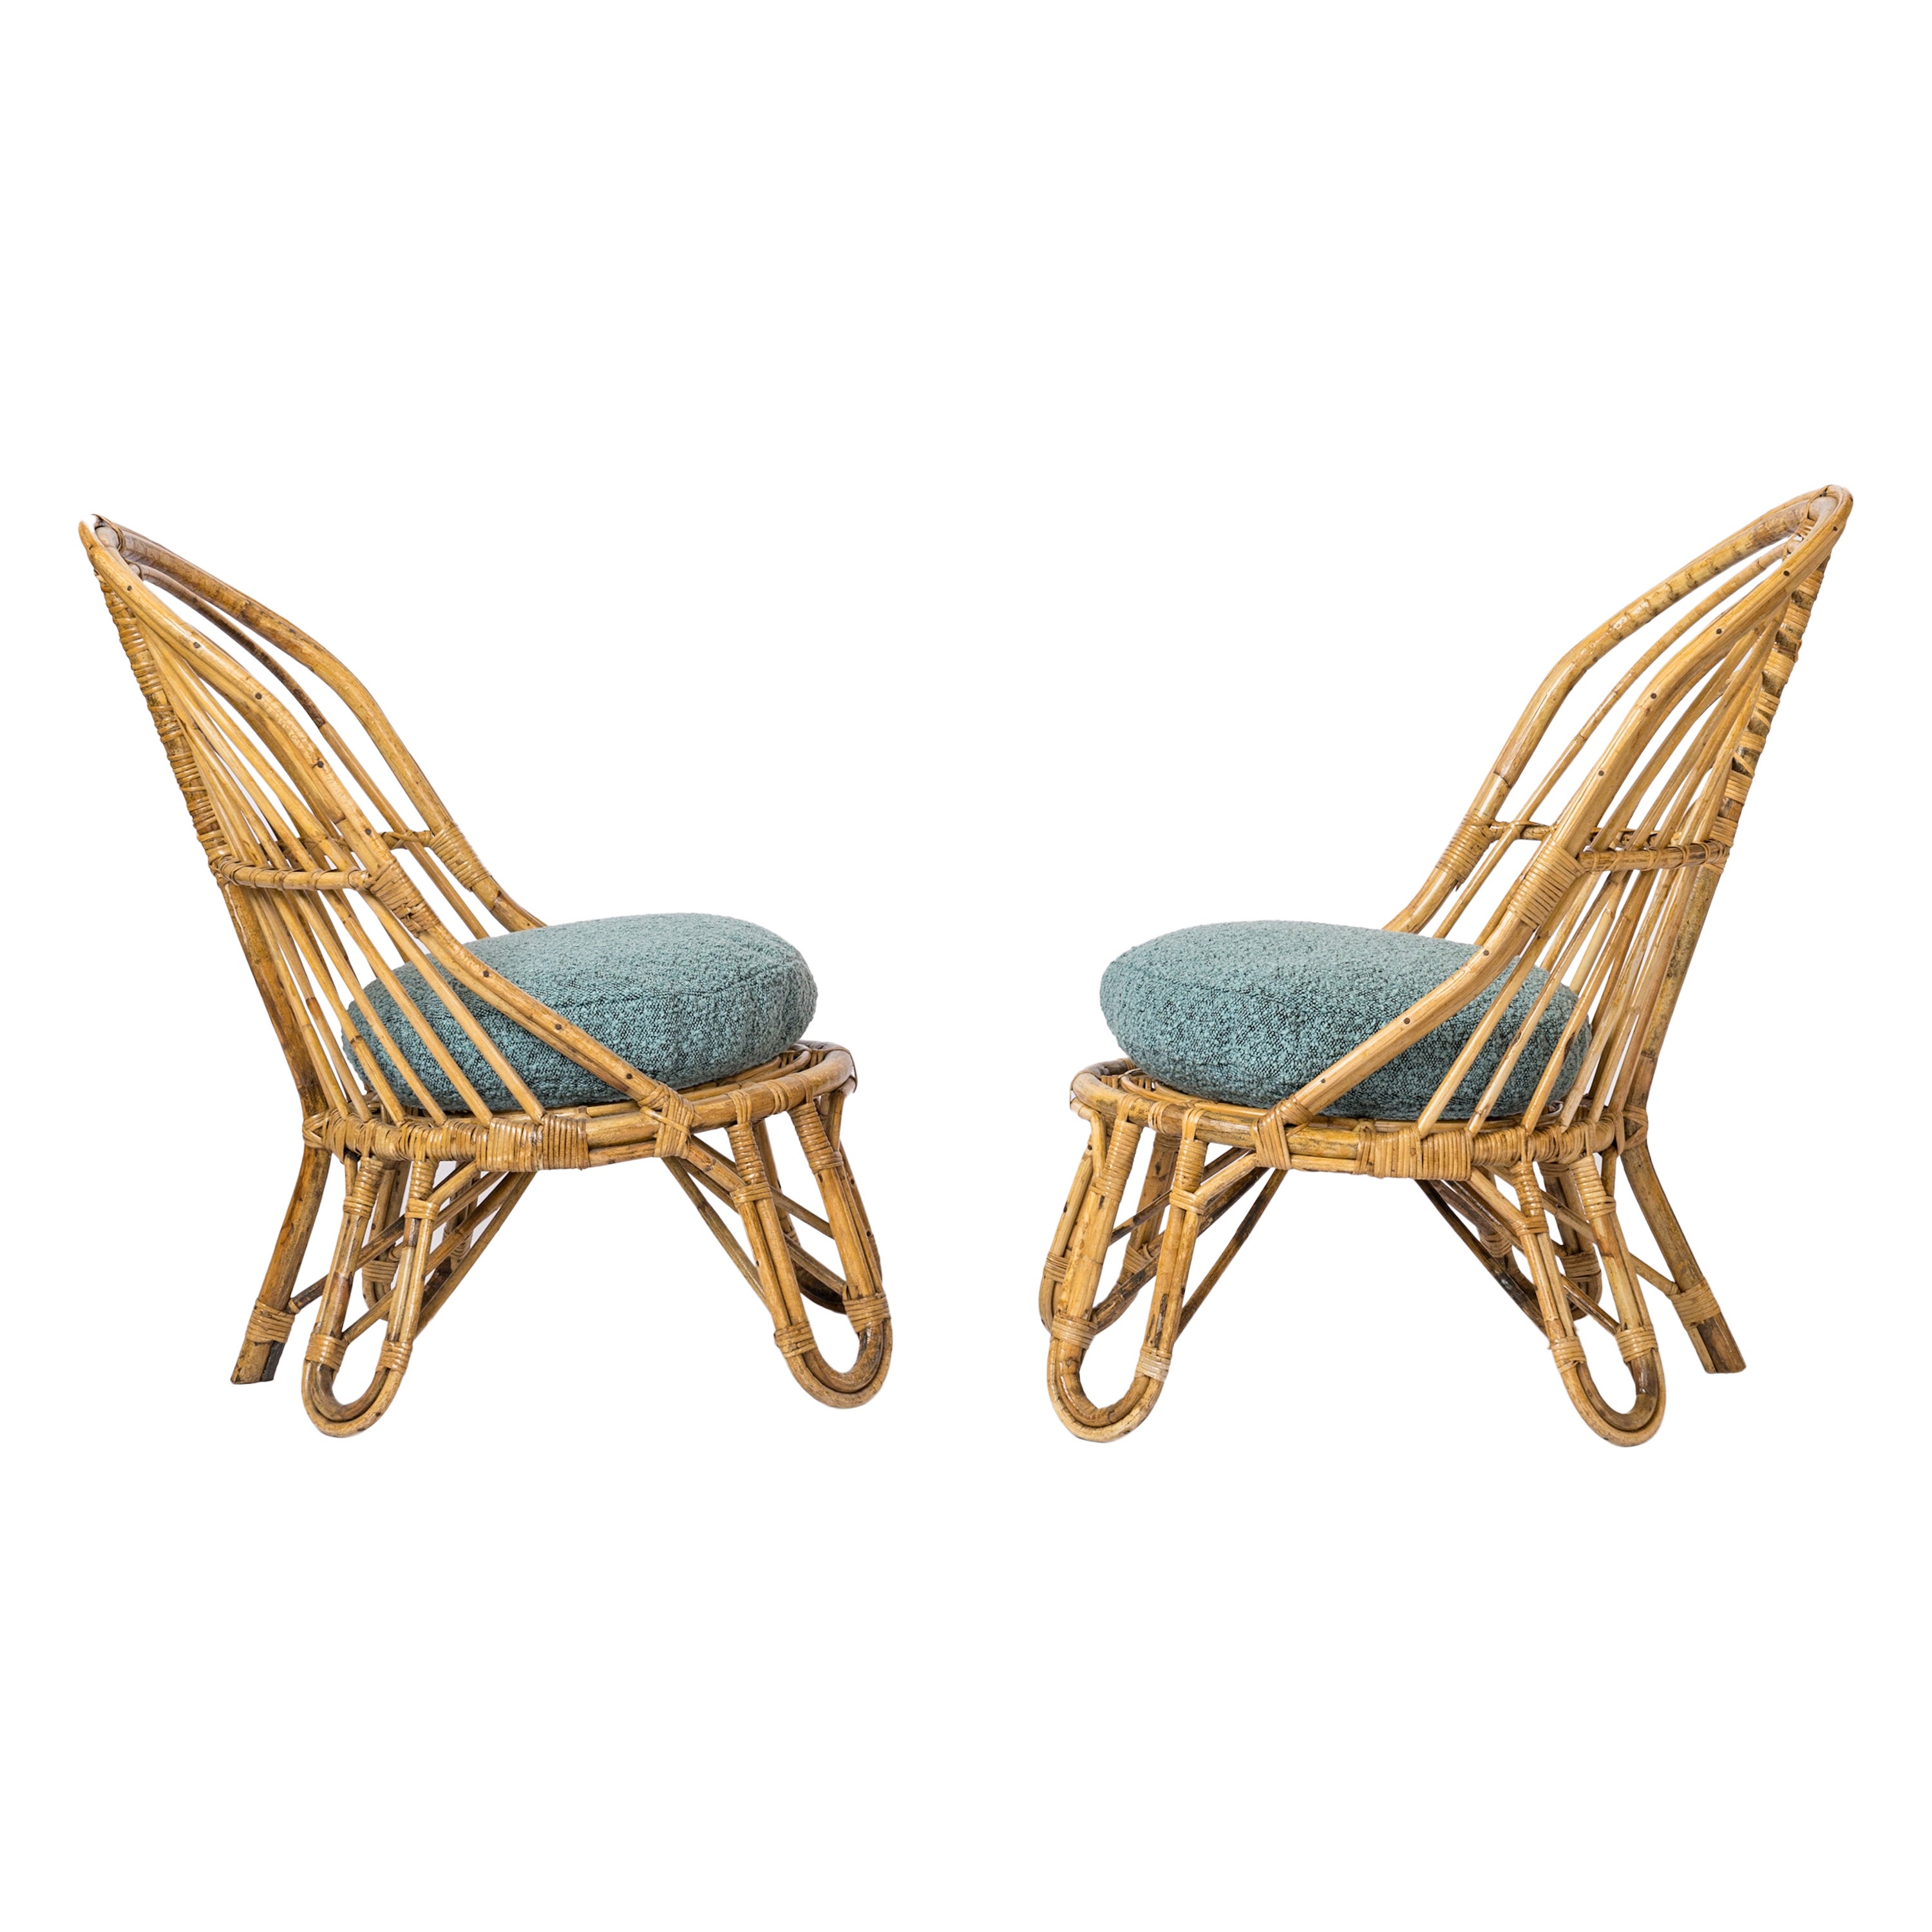 Two L. Sognot Style Rattan Lounge Chairs w. Blue "Chiné" Cushions - France 1950s For Sale